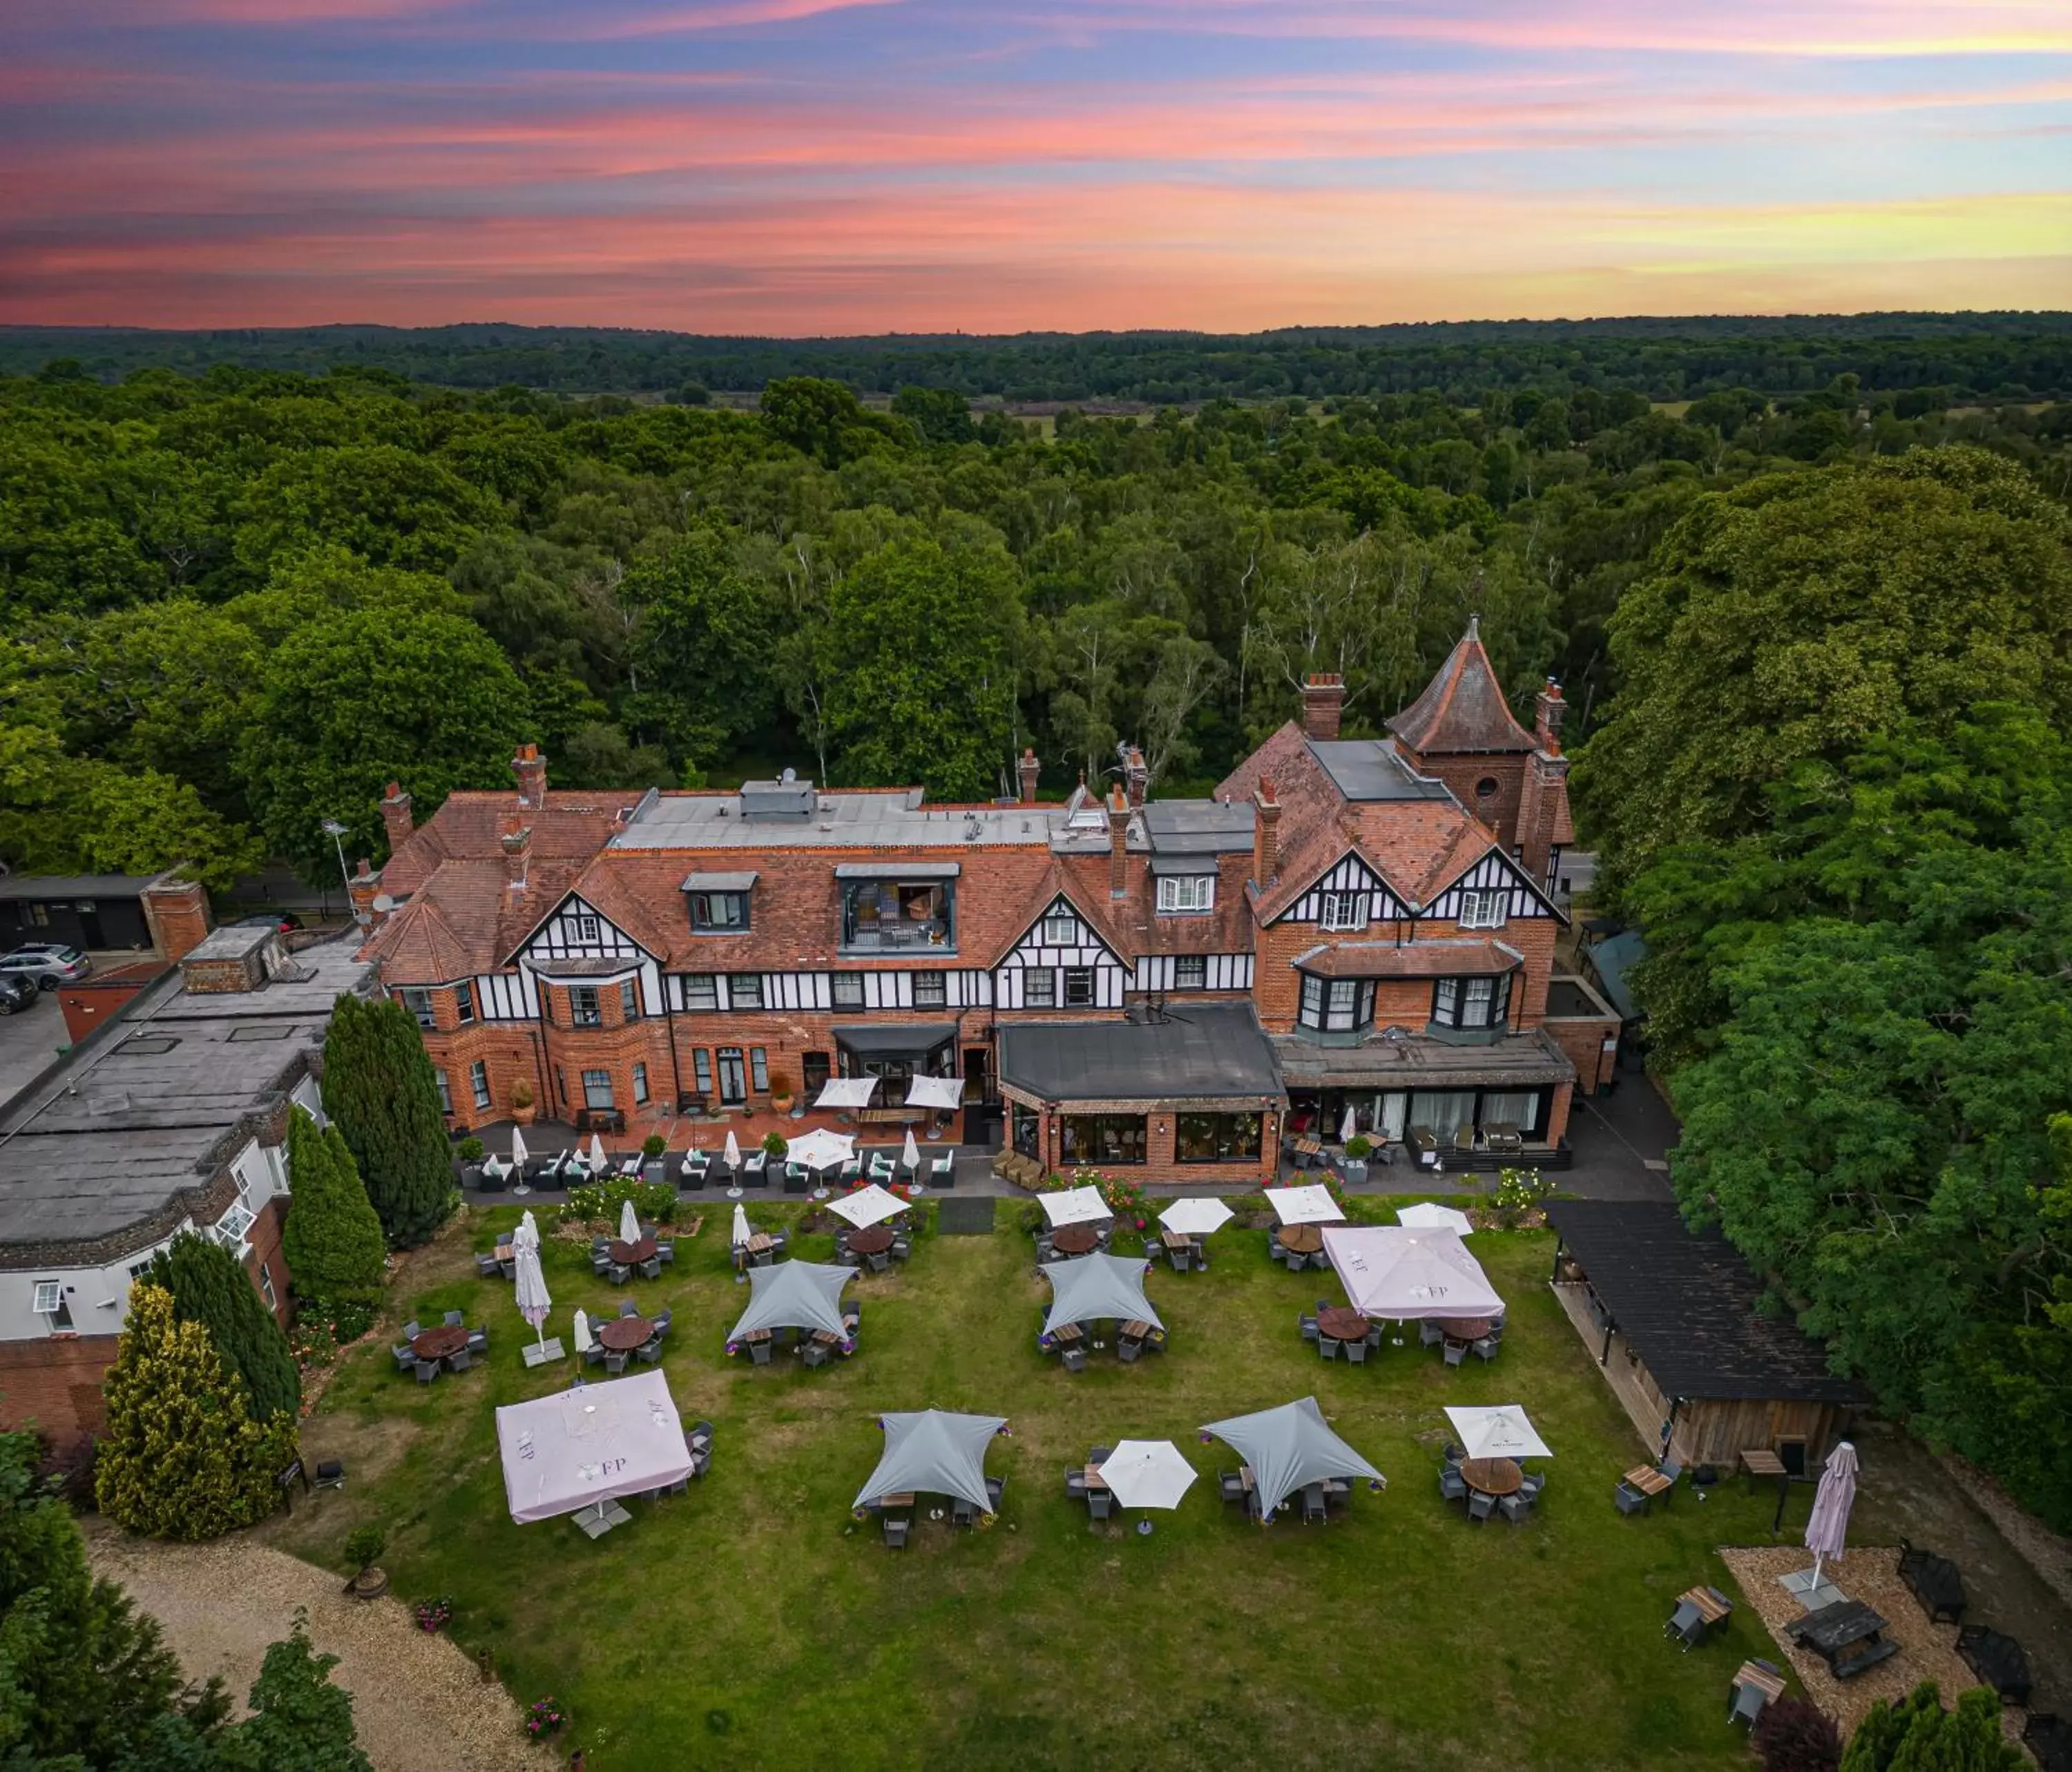 Property building, Bird's-eye View in Forest Park Country Hotel & Inn, Brockenhurst, New Forest, Hampshire